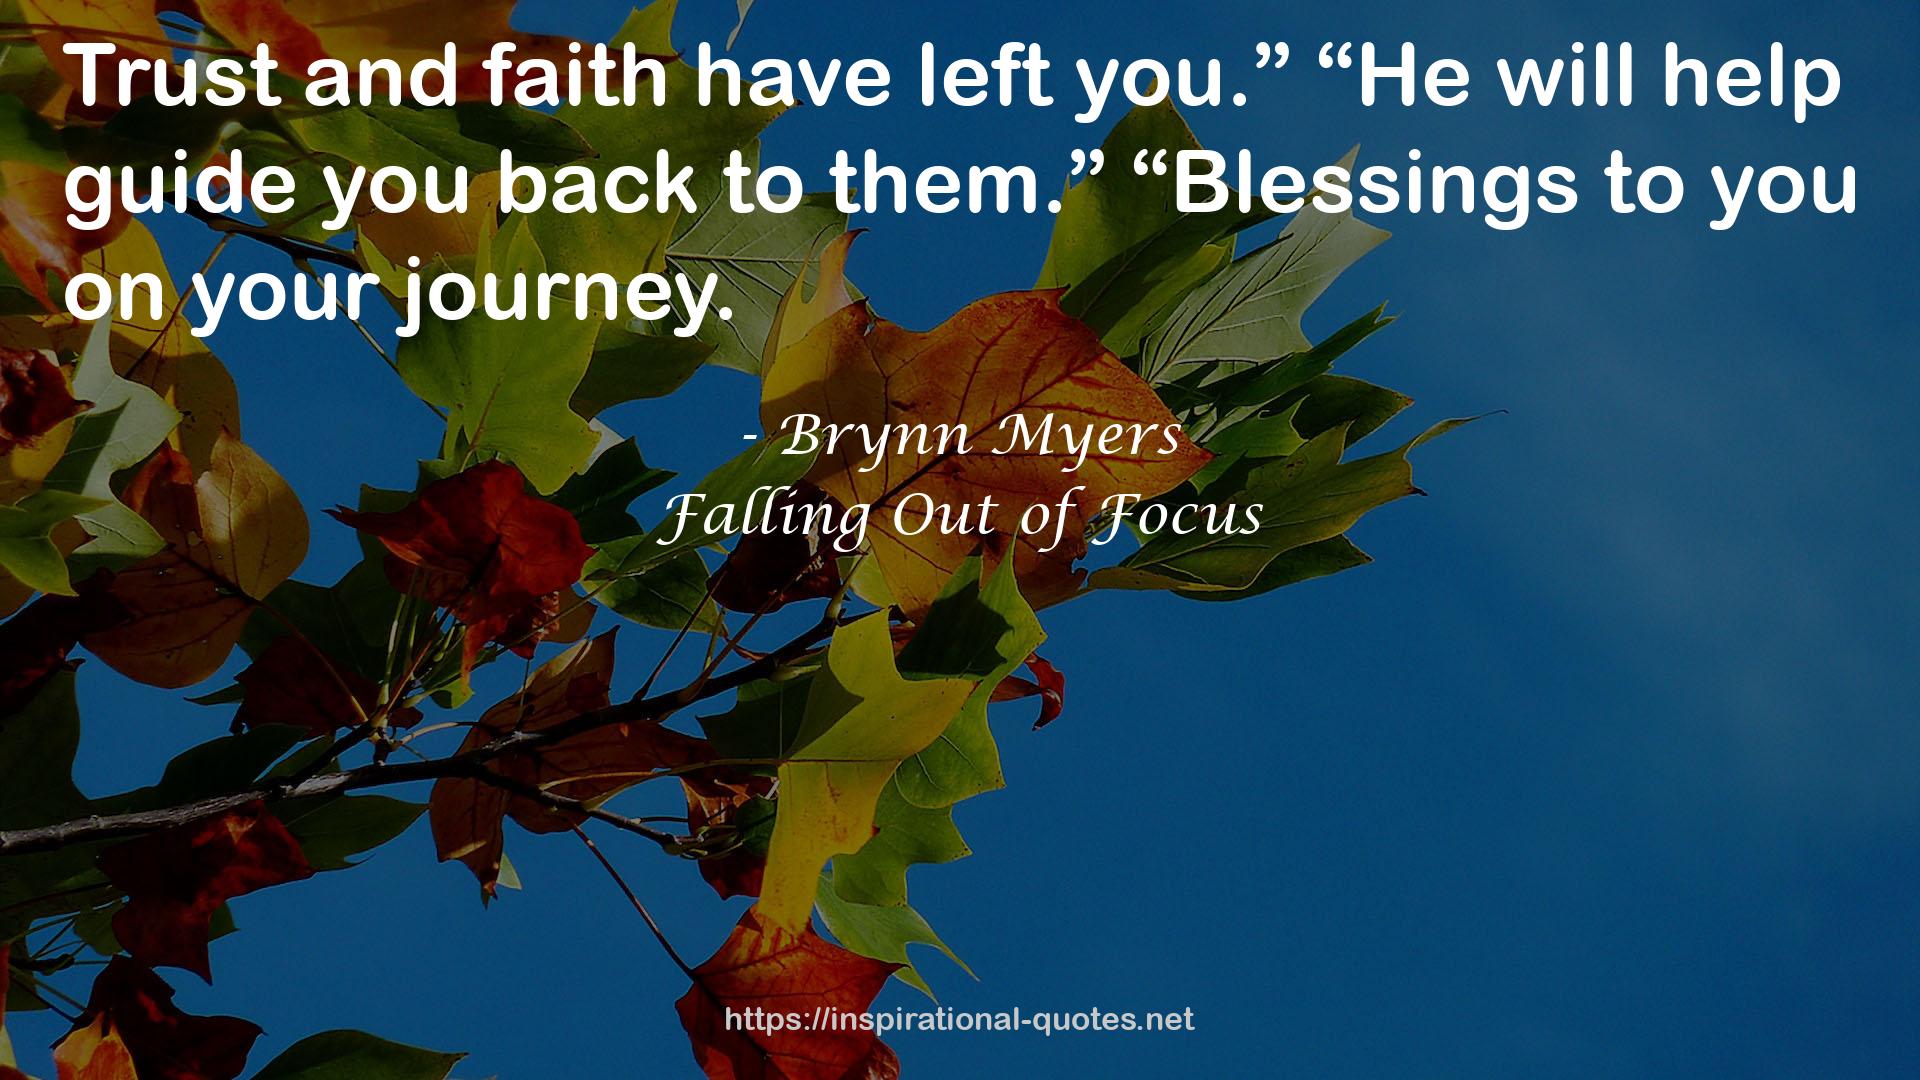 “Blessings  QUOTES